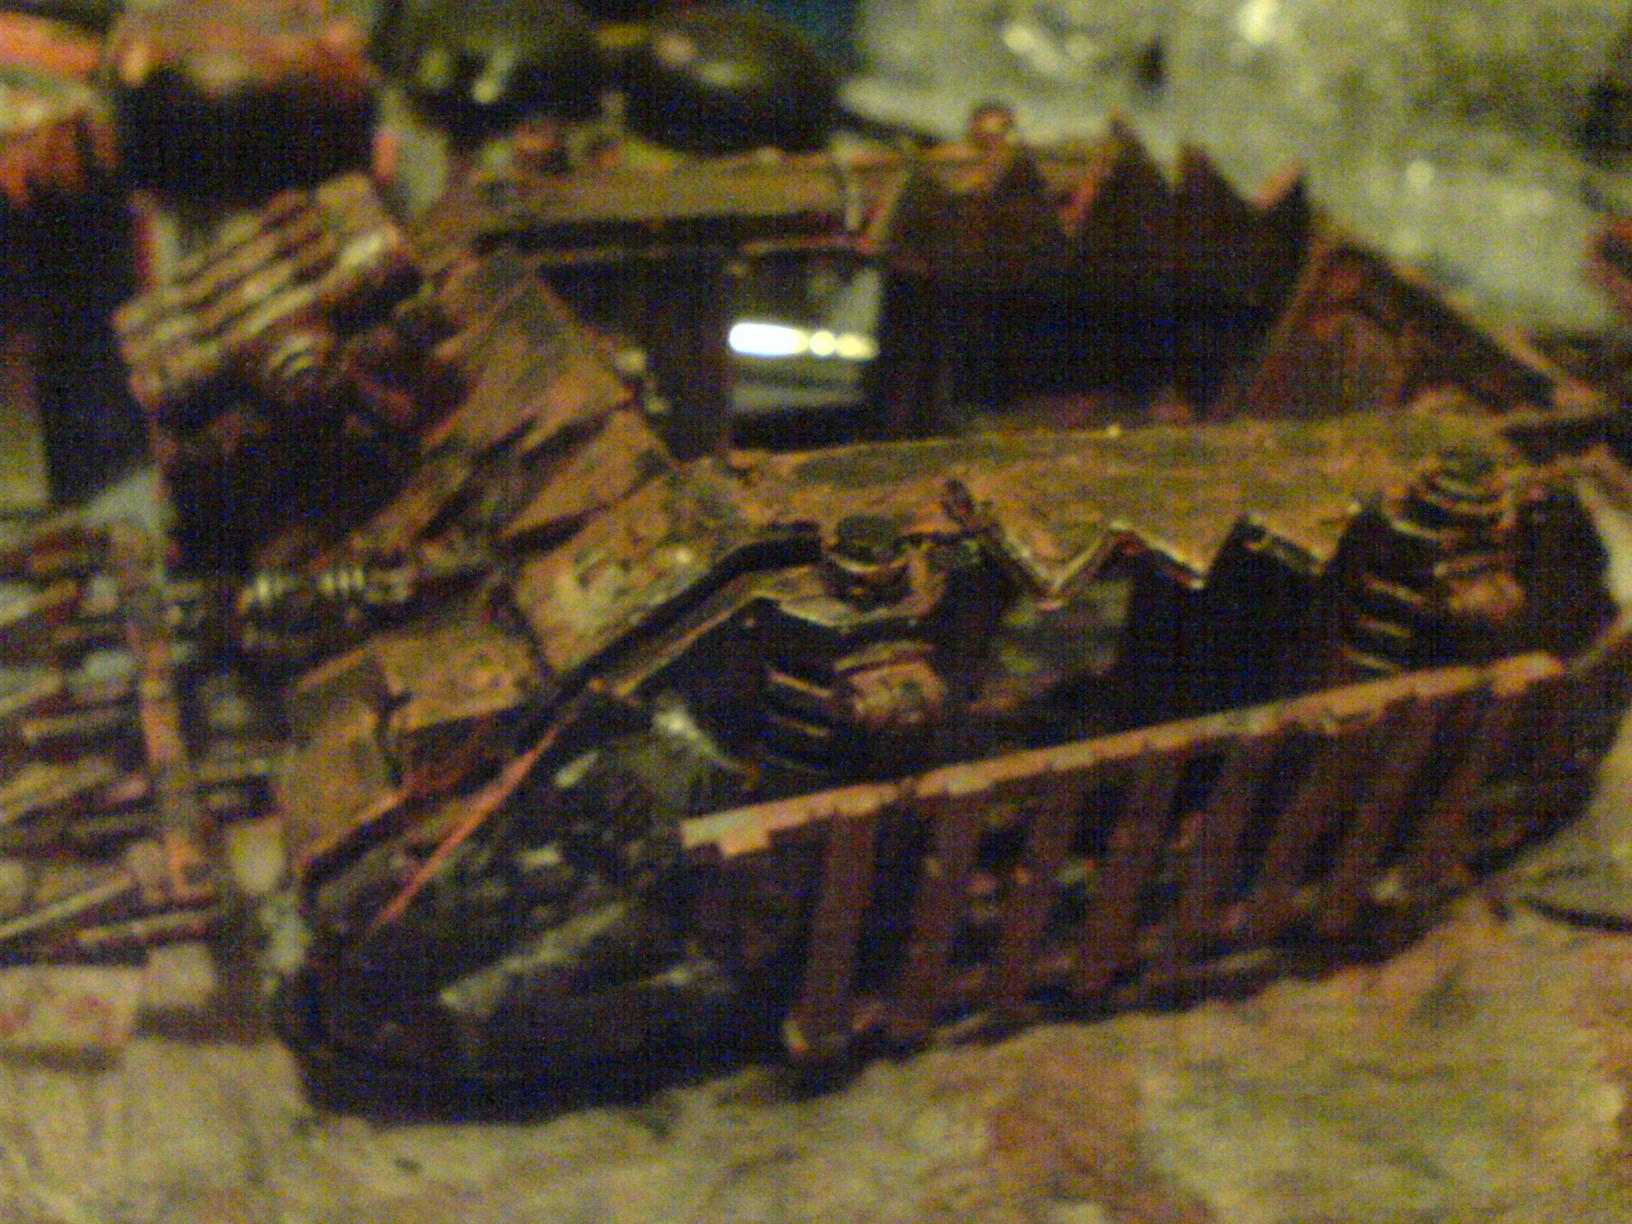 a second looted rhino fer me chaos orks; check me other threadfer more pics etc..